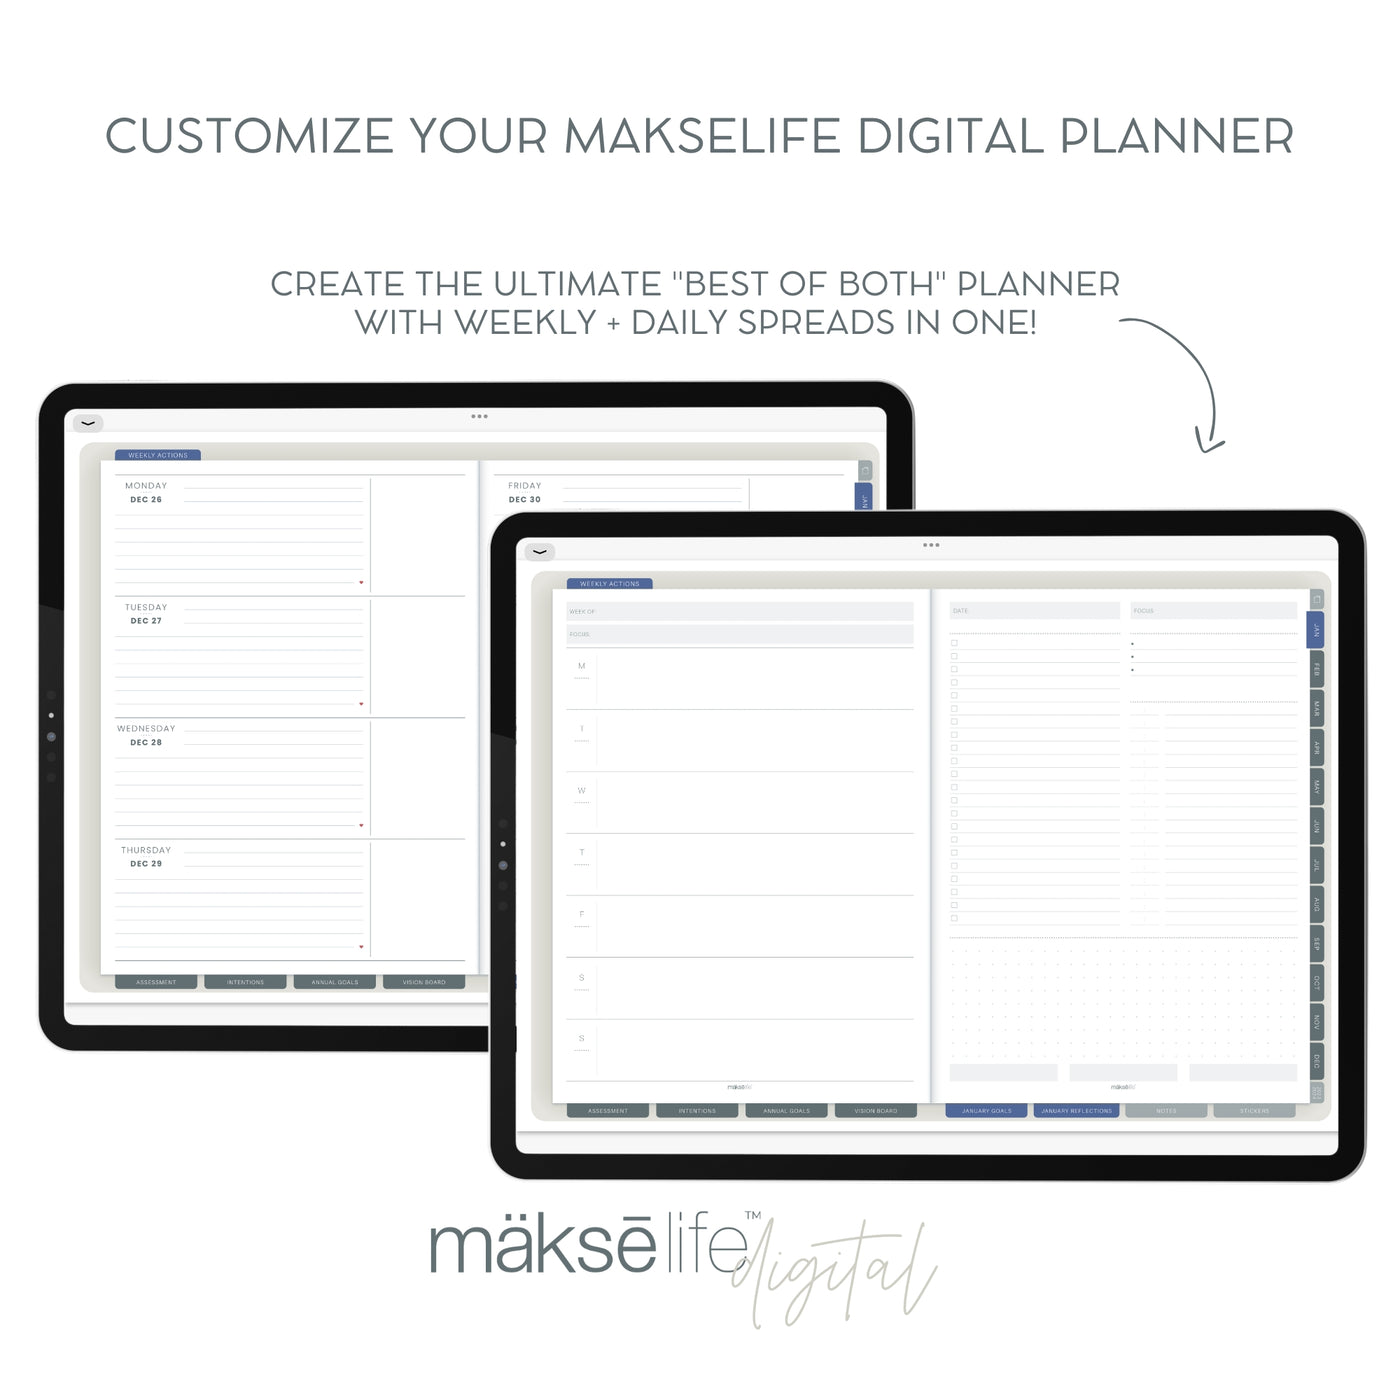 Digital Planning Inserts - Weekly Overview & Daily Pages